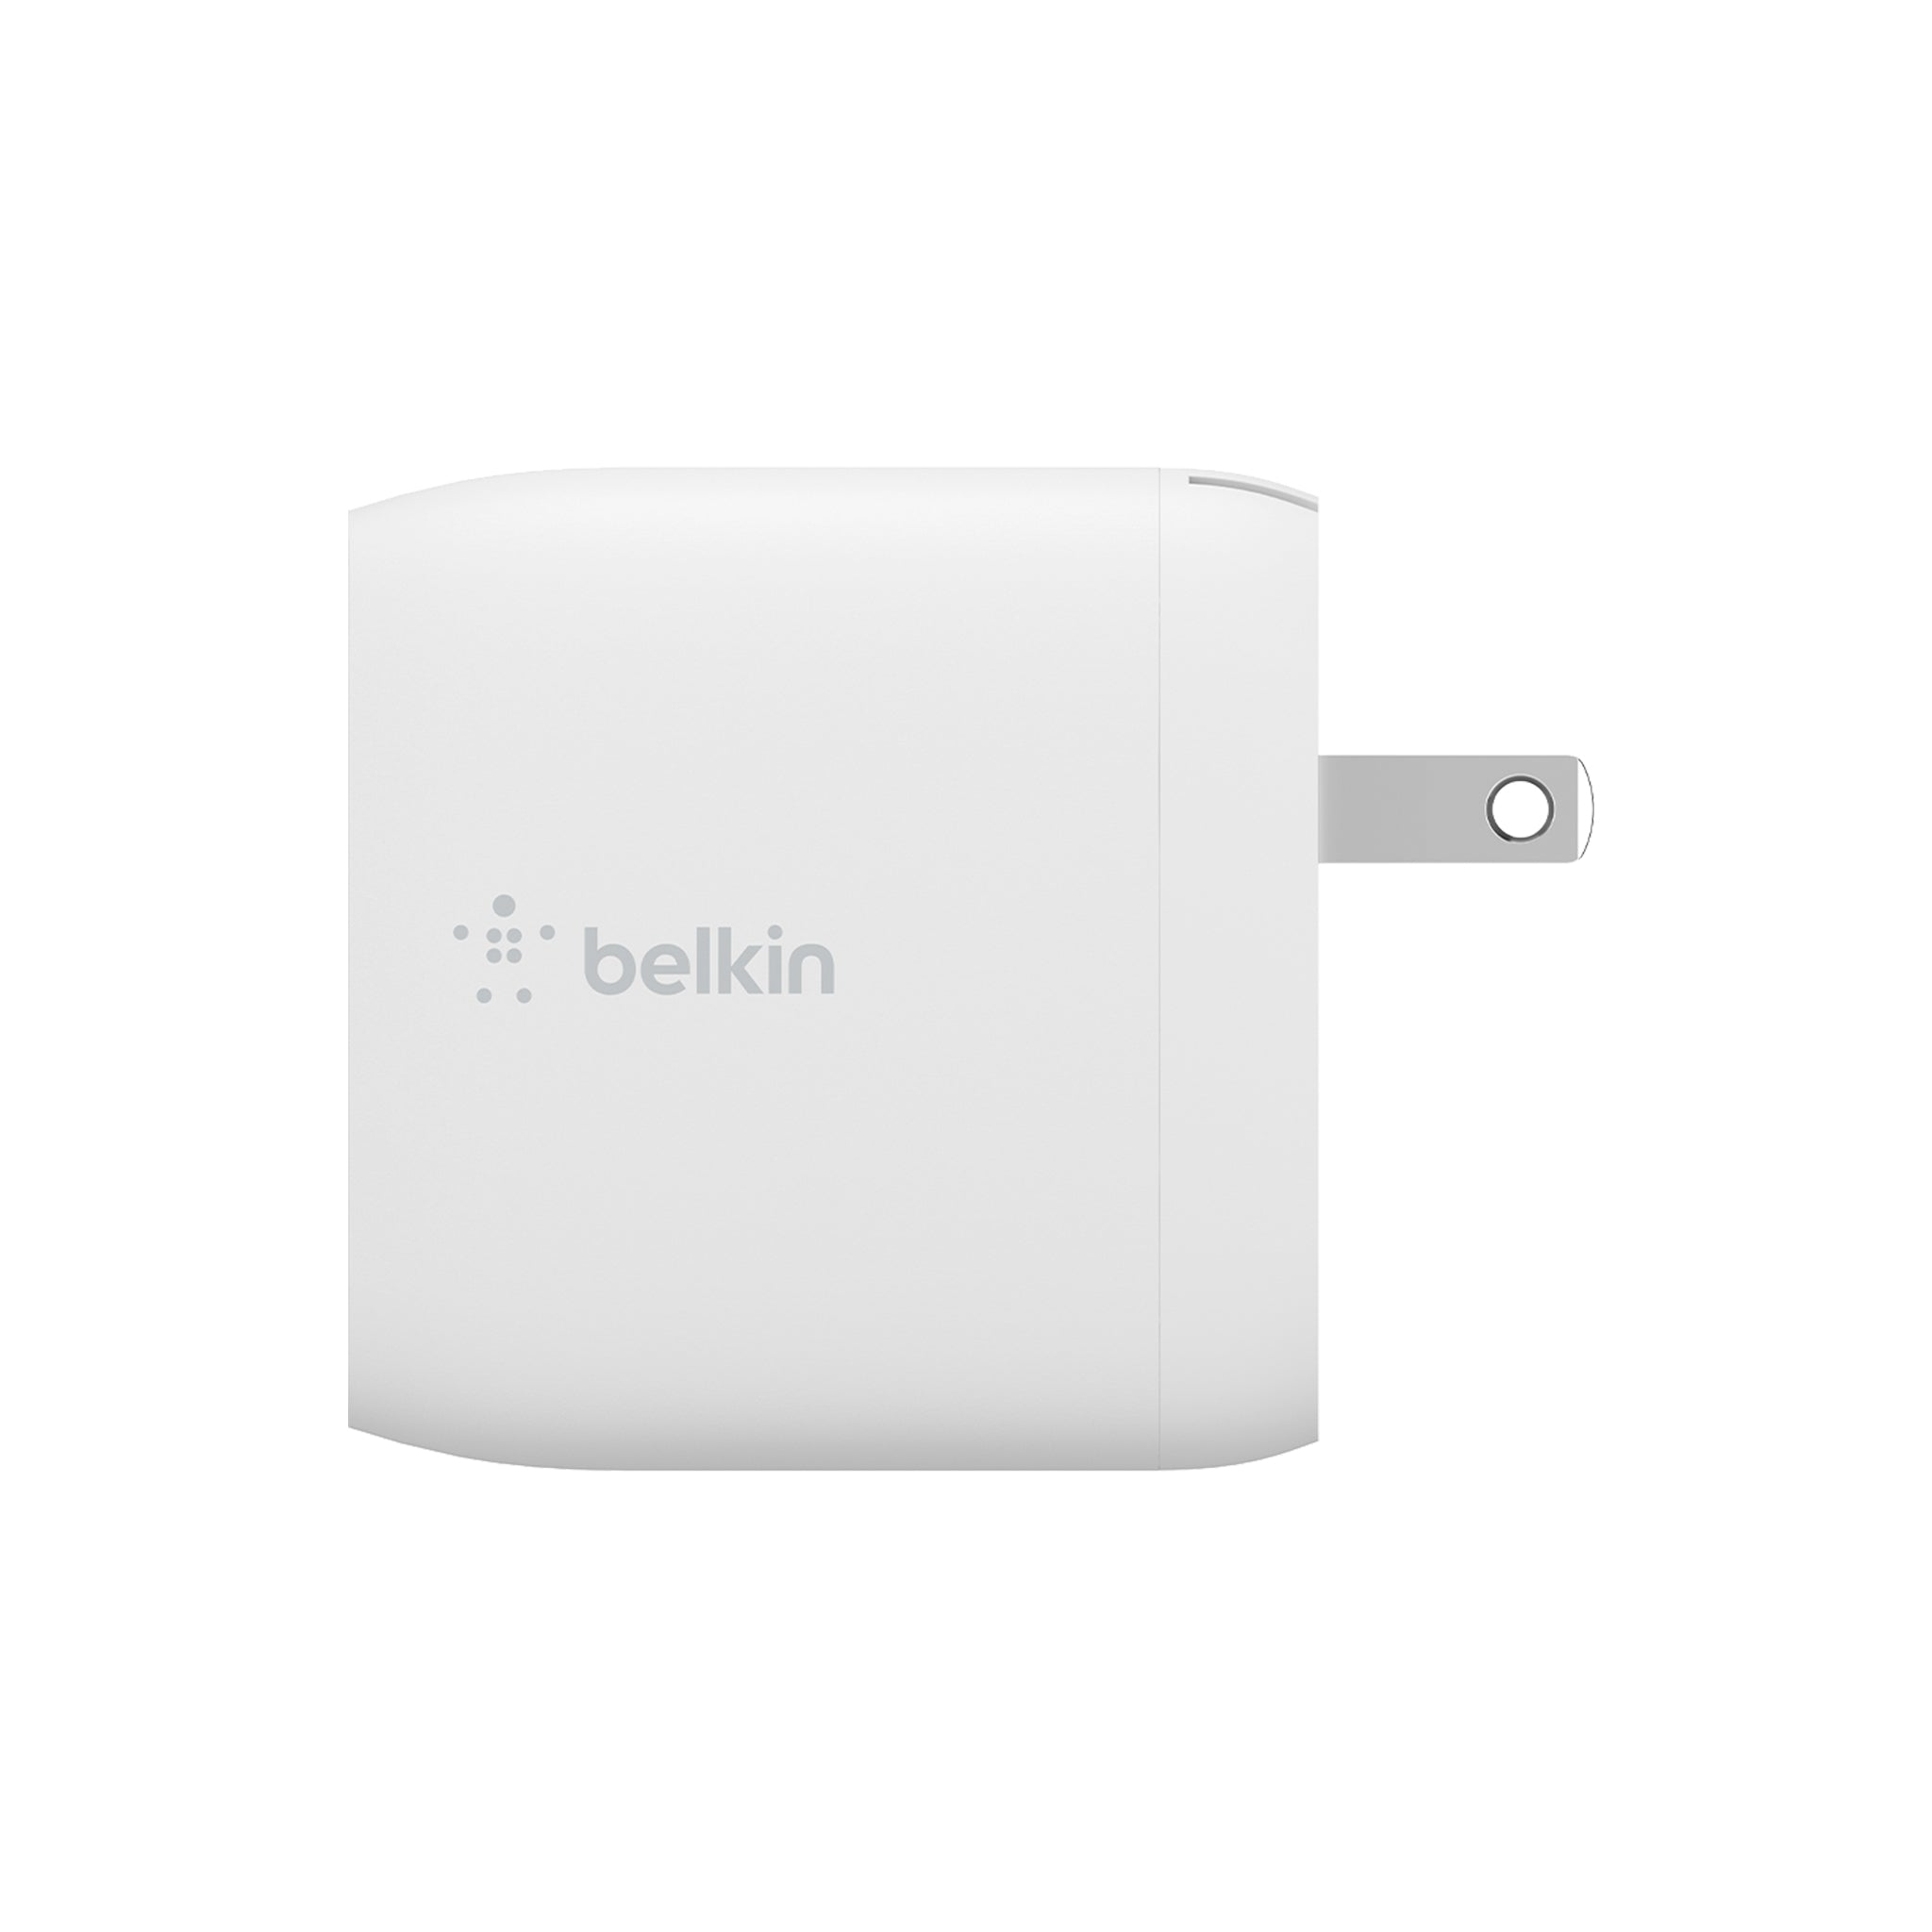 Belkin - Dual Port Usb A 24w Wall Charger With Usb A To Usb C Cable 3ft - White